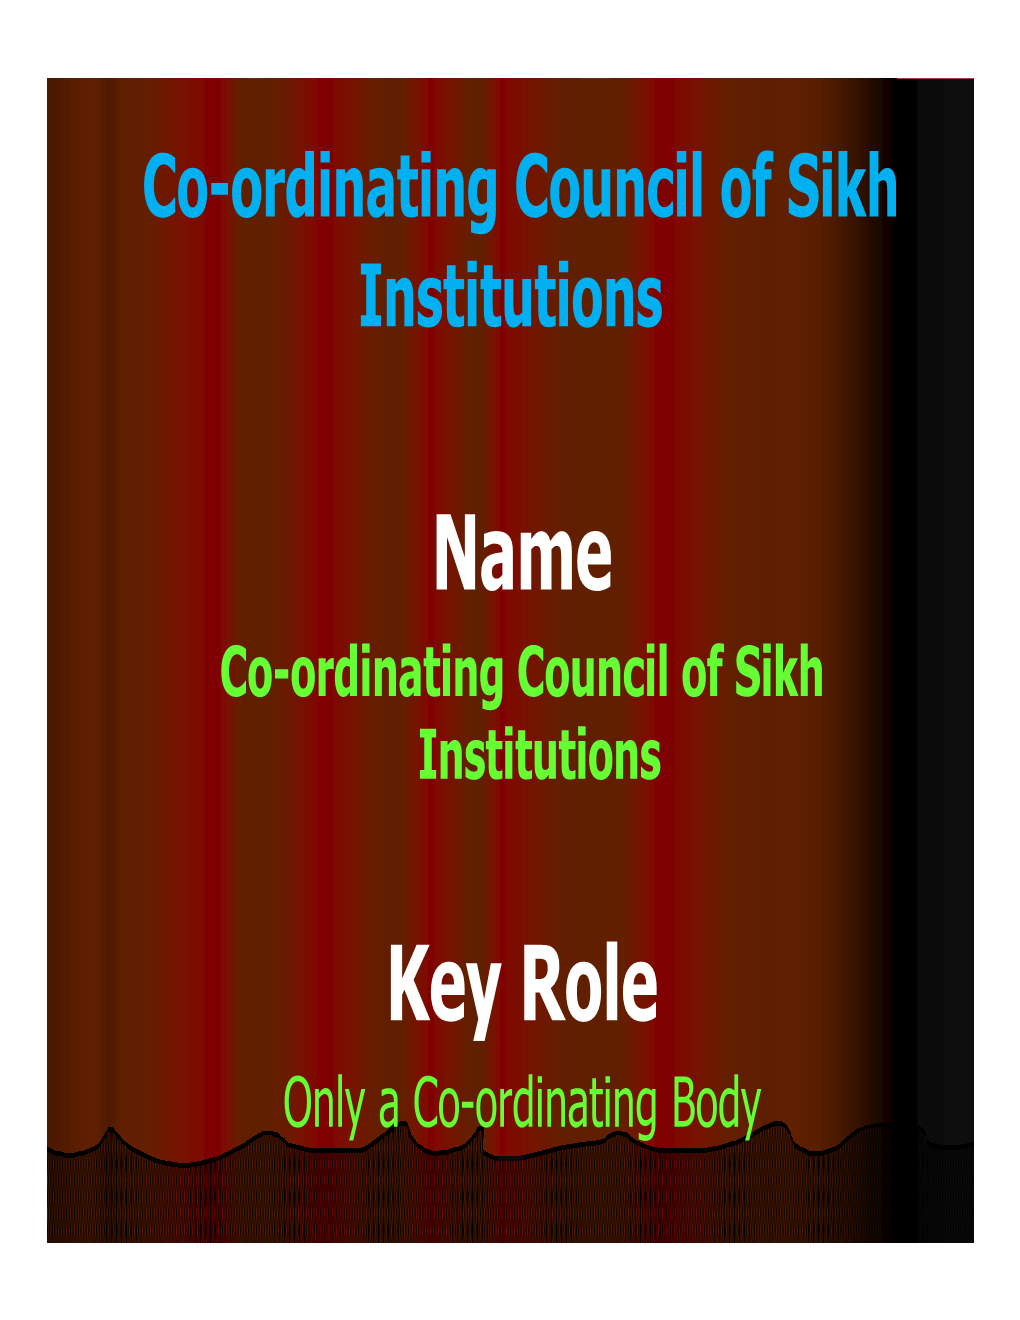 Coordinating Council of Sikh Institutions